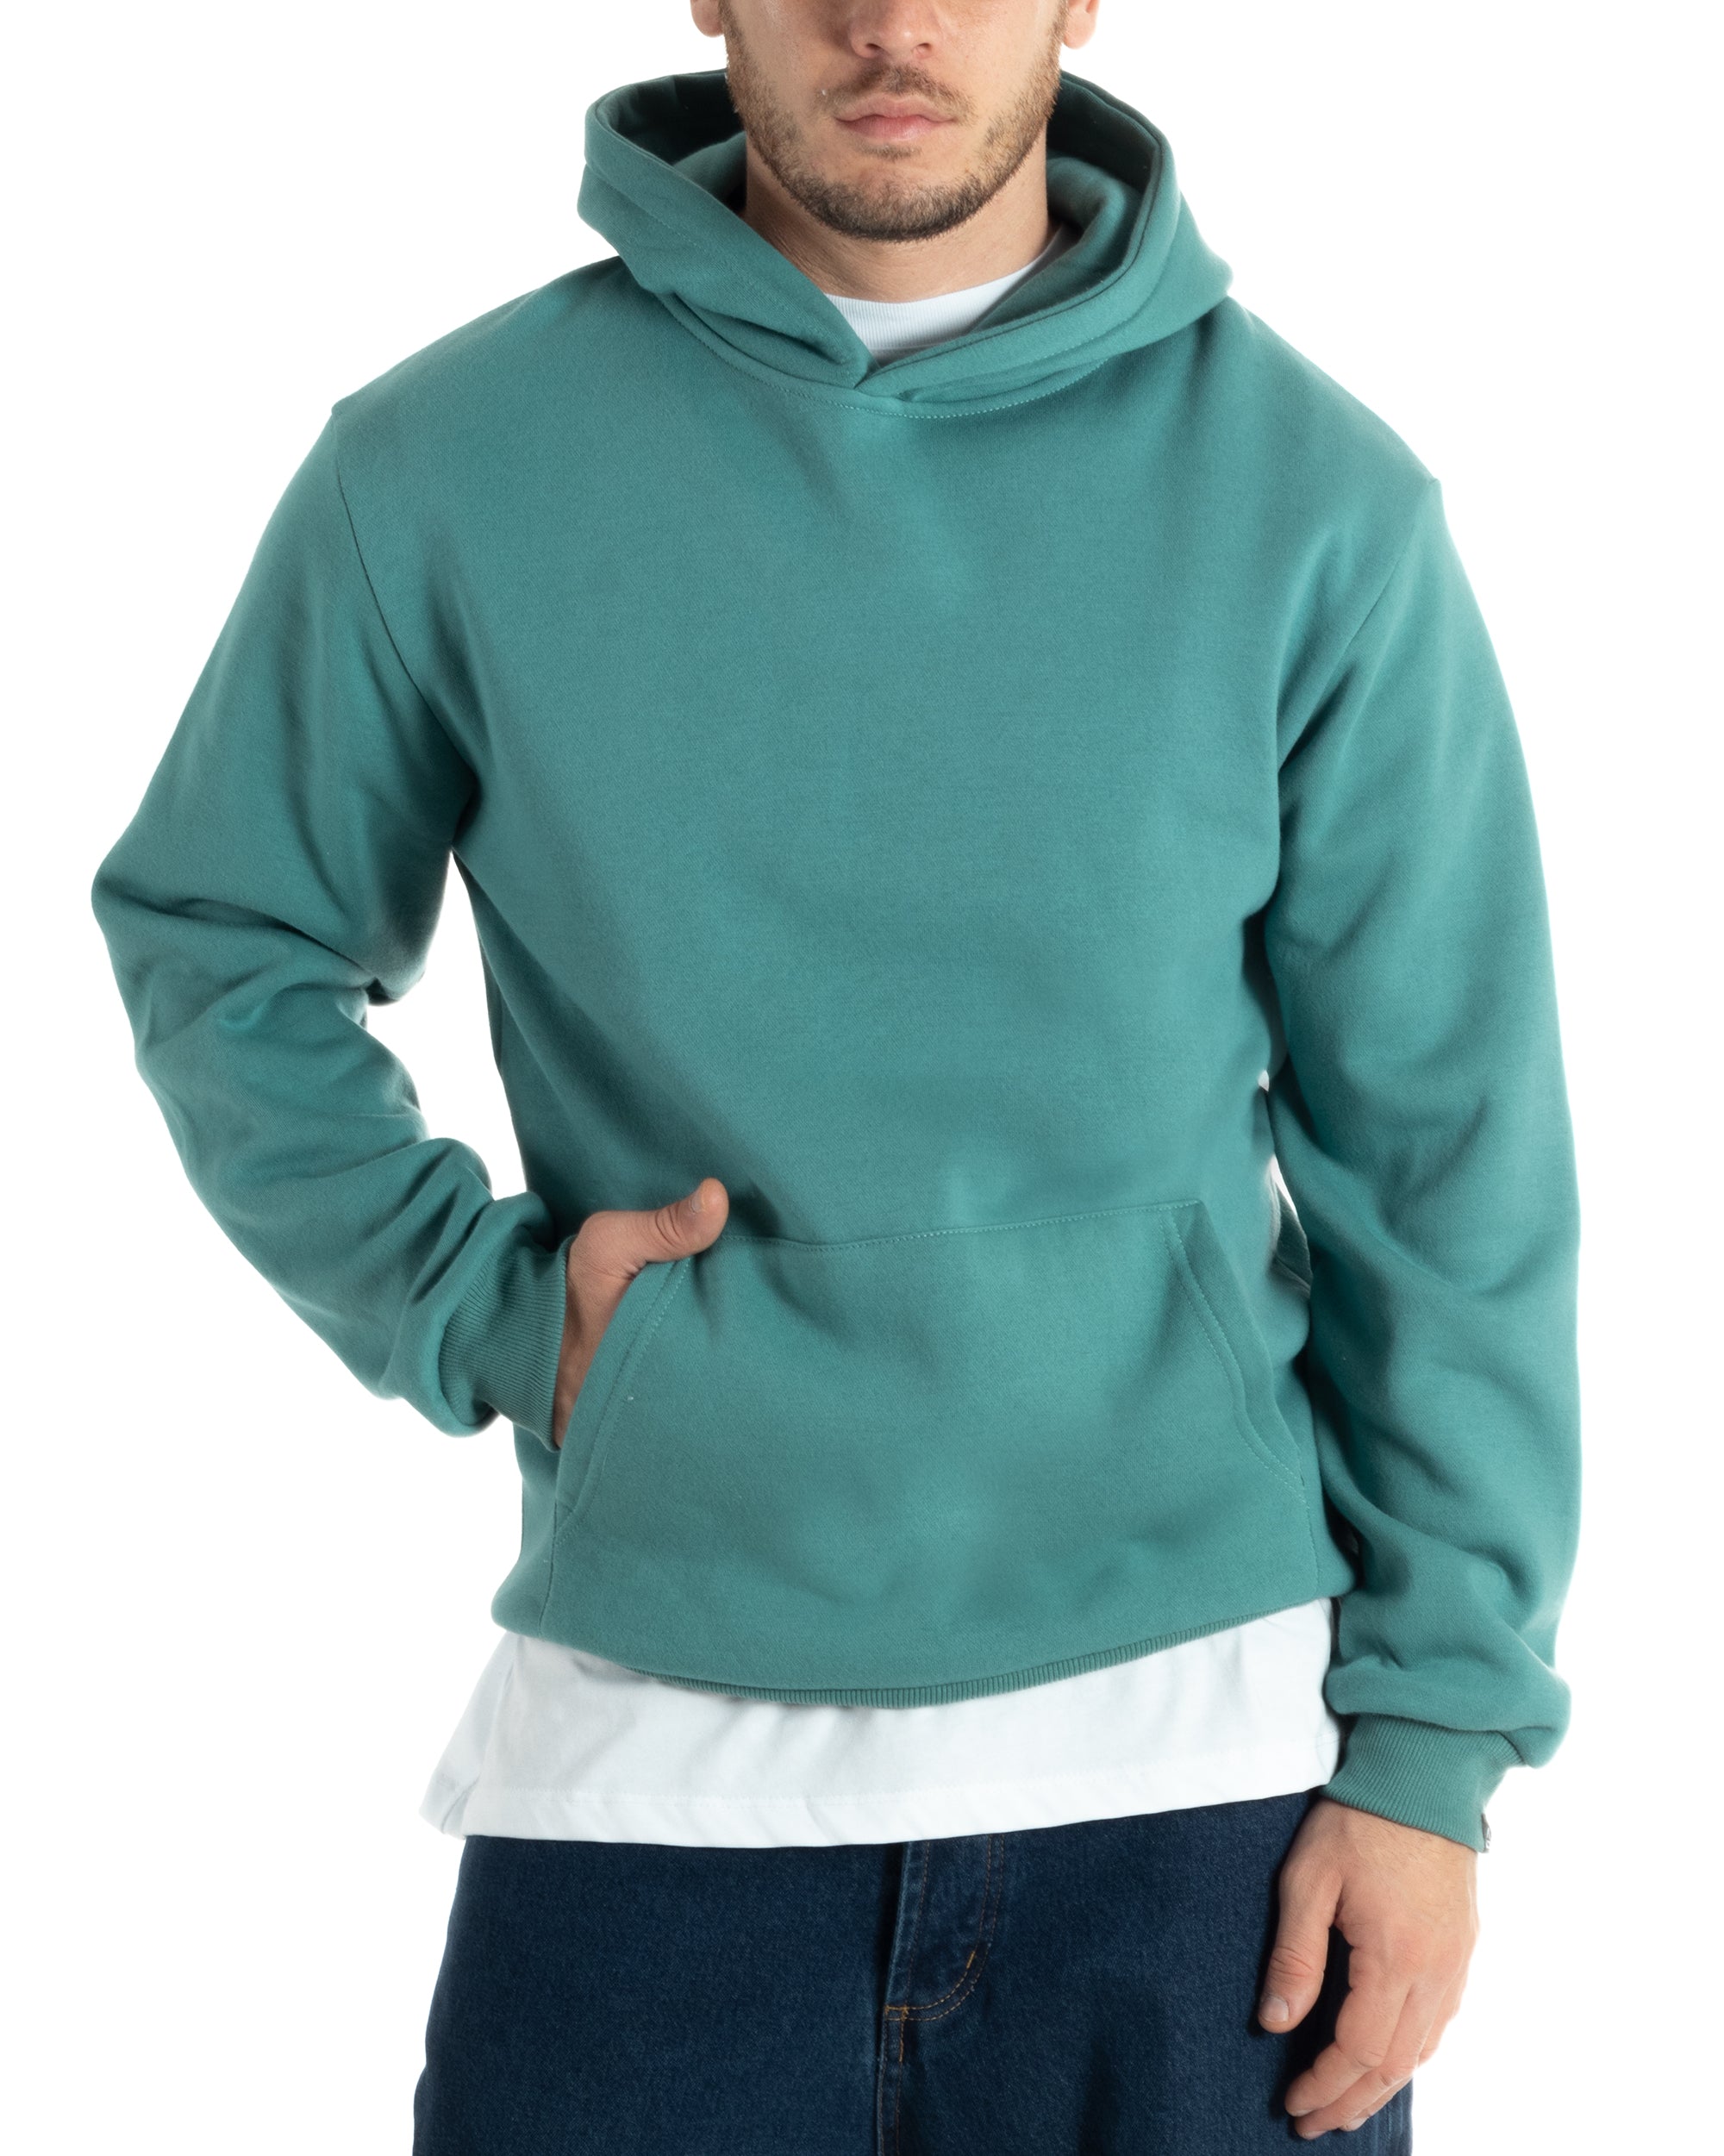 Men's Basic Hoodie Sweatshirt Solid Color Black Comfortable Relaxed Fit GIOSAL-F2956A